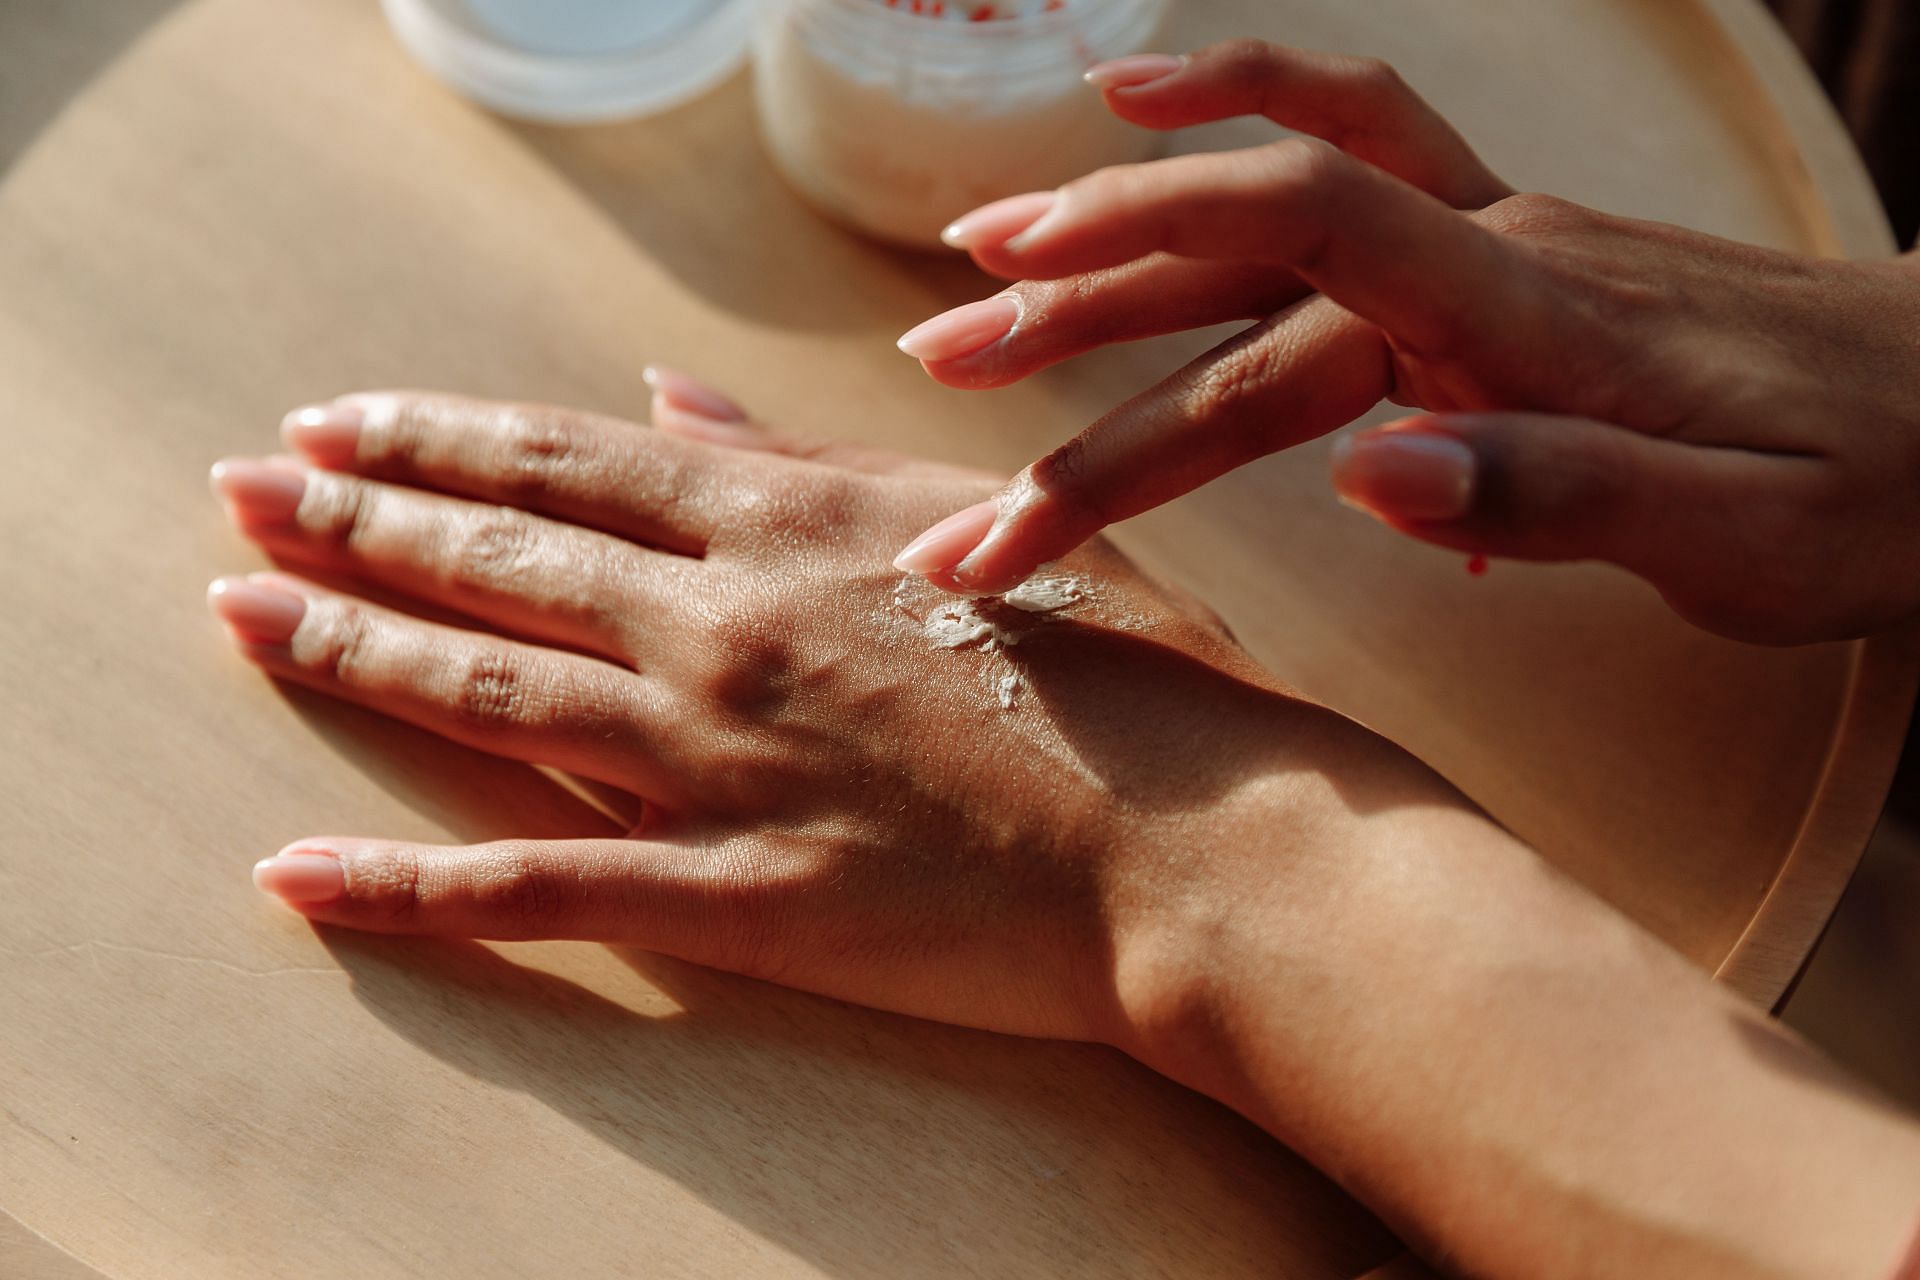 itching and burning sensation is the most common symptoms of psoriasis. (Image via Pexels / Thirdman)